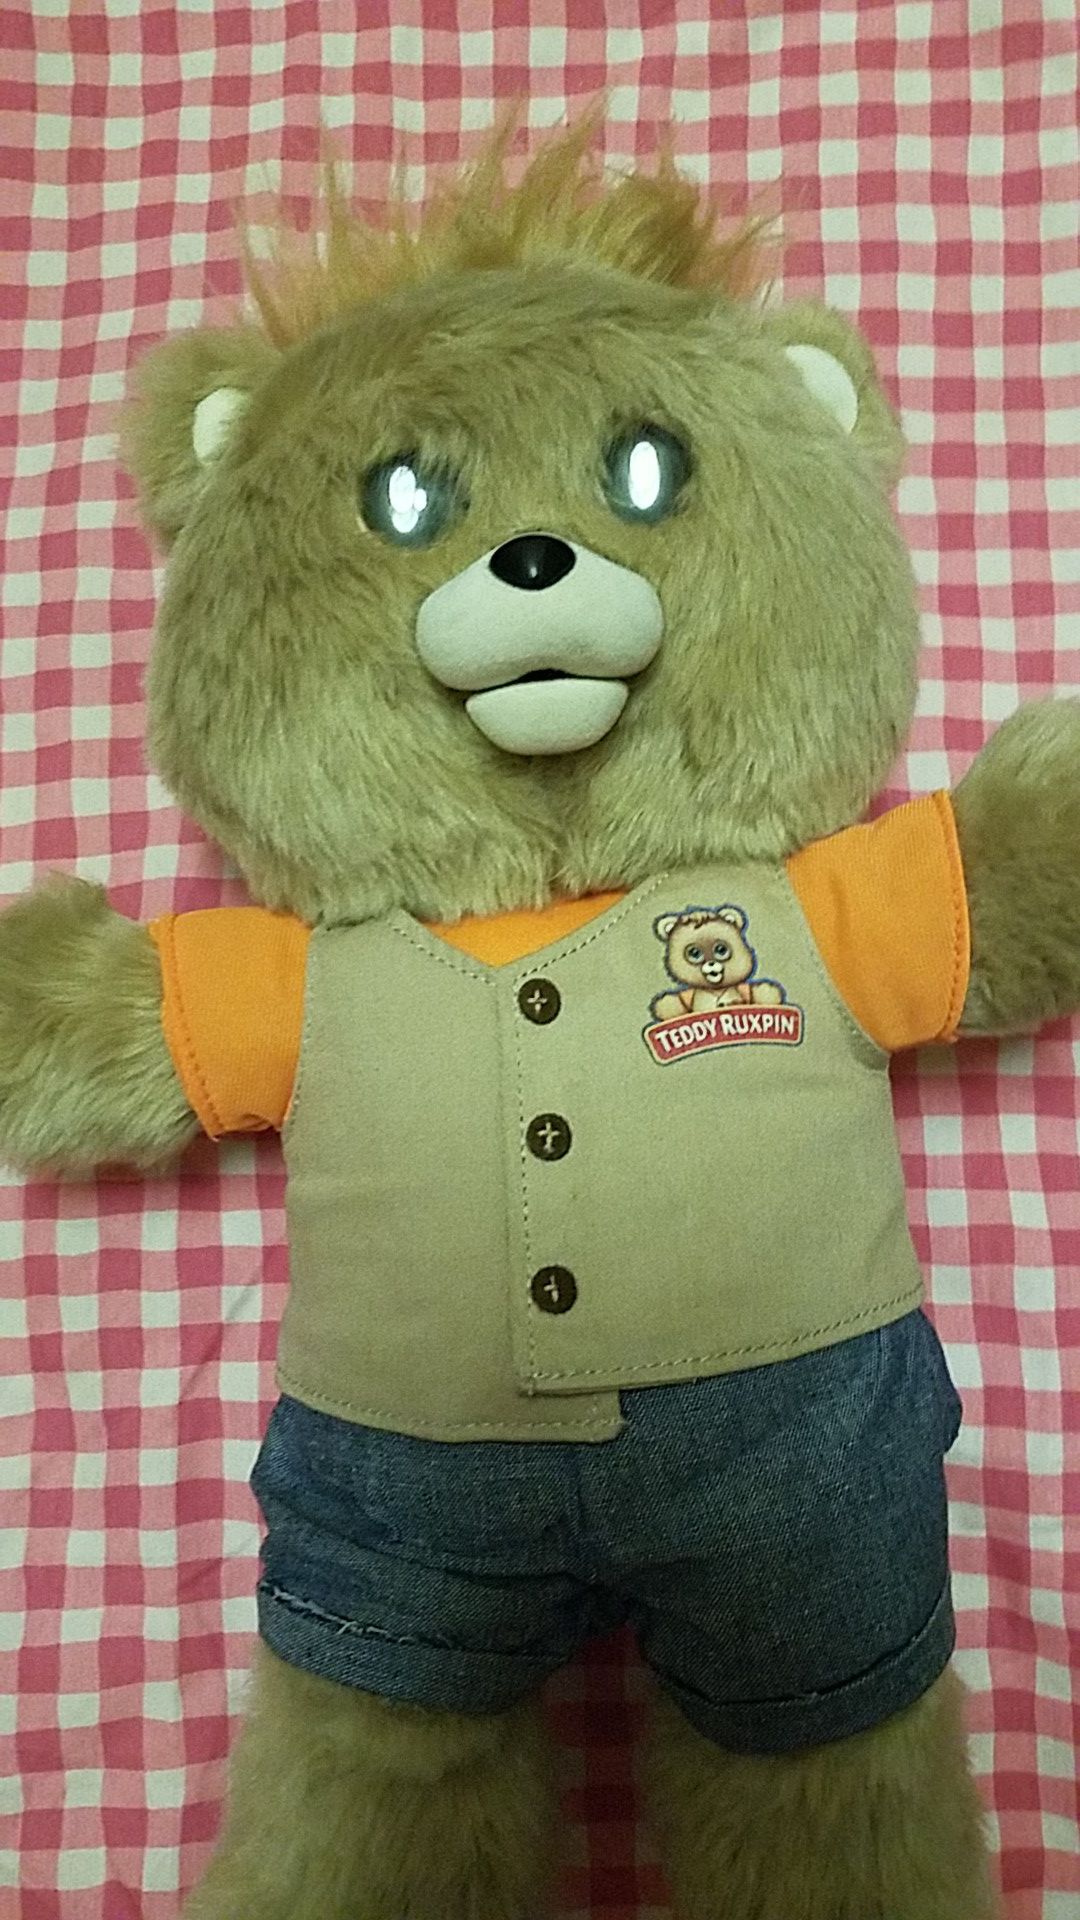 Teddy ruxpin story telling friend bear price a little negotiable